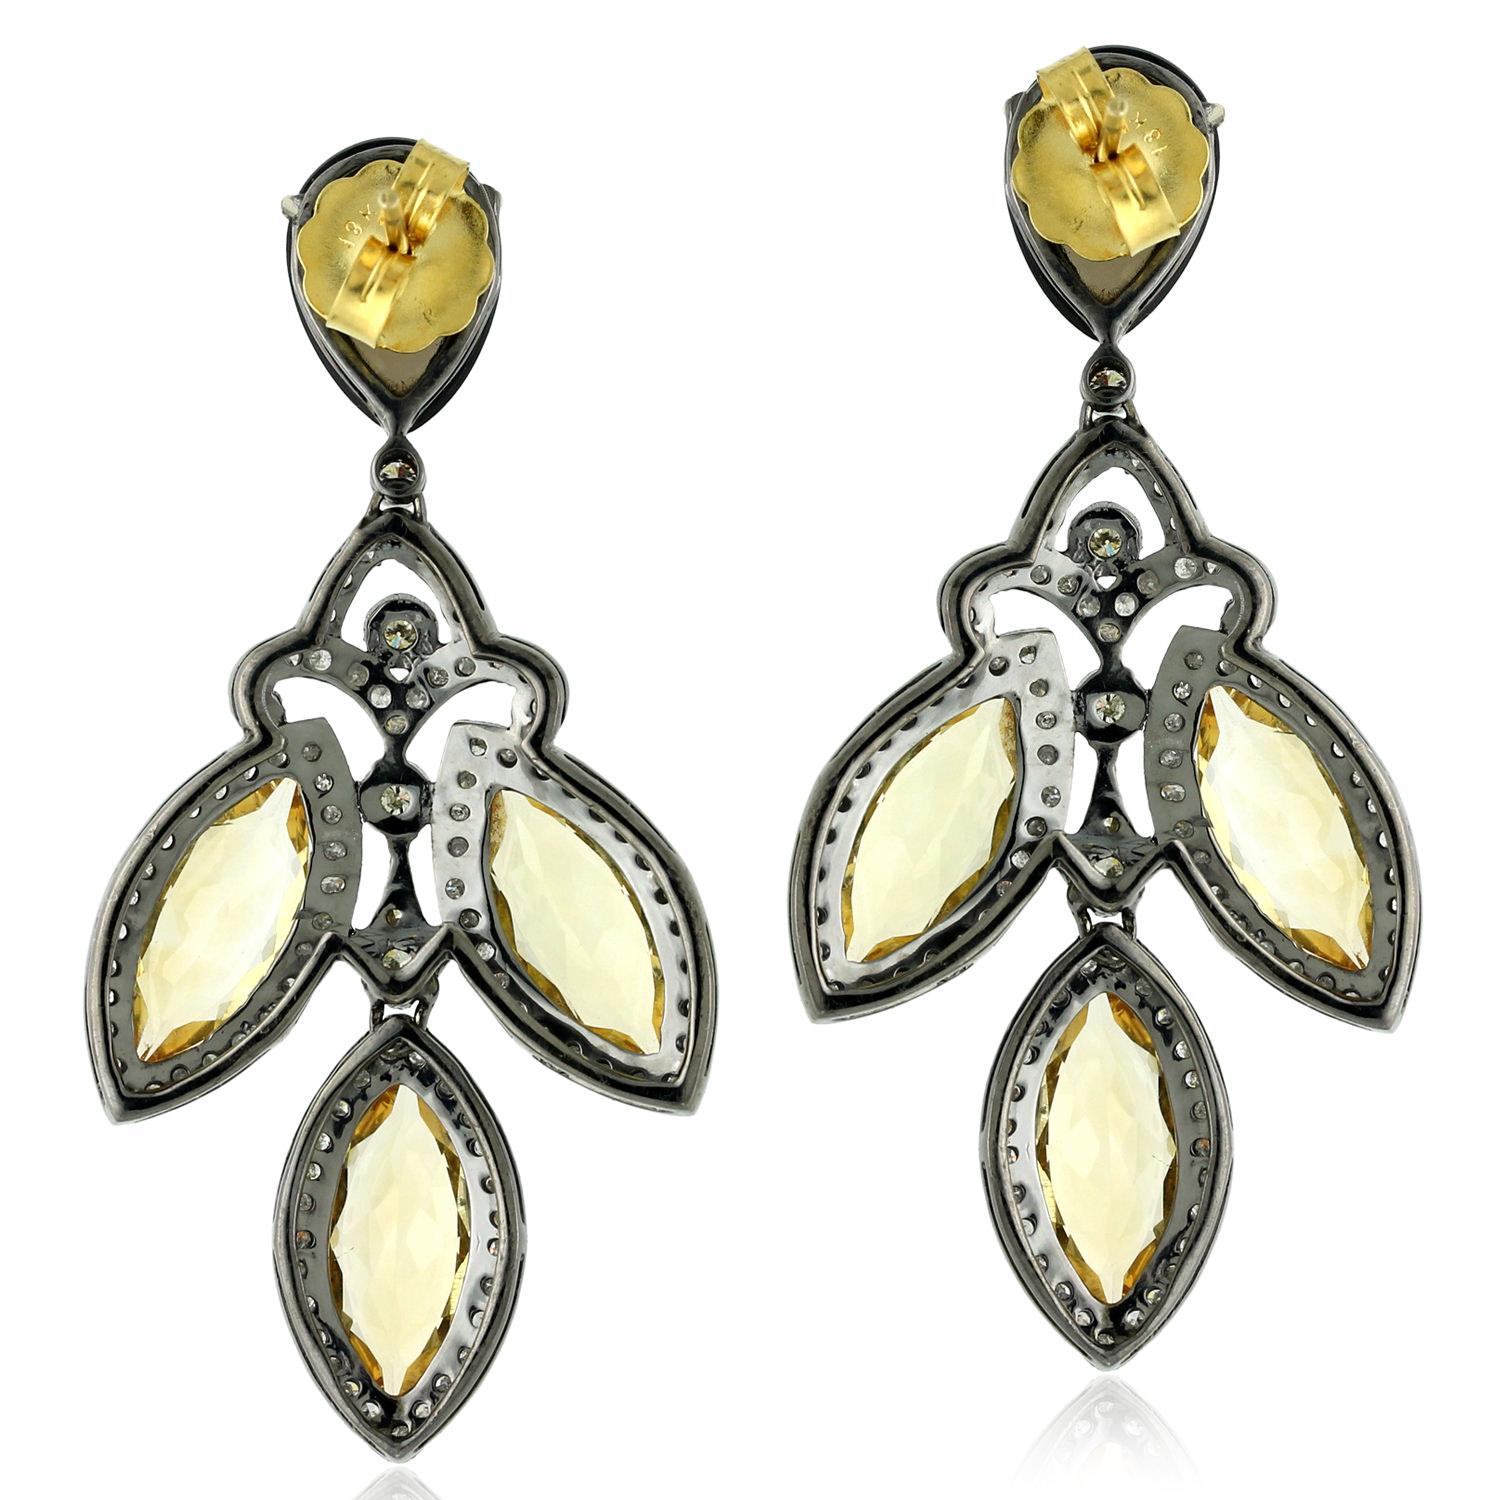 Designer Chandelier Citrine Smoky Quartz and Diamond Earrings in Gold and Silver

18kt gold: 2.62gms
Diamond: 3.1cts
Silver: 10.1gms
Citrine: 16.00cts
Smoky Quartz: 11.65cts
